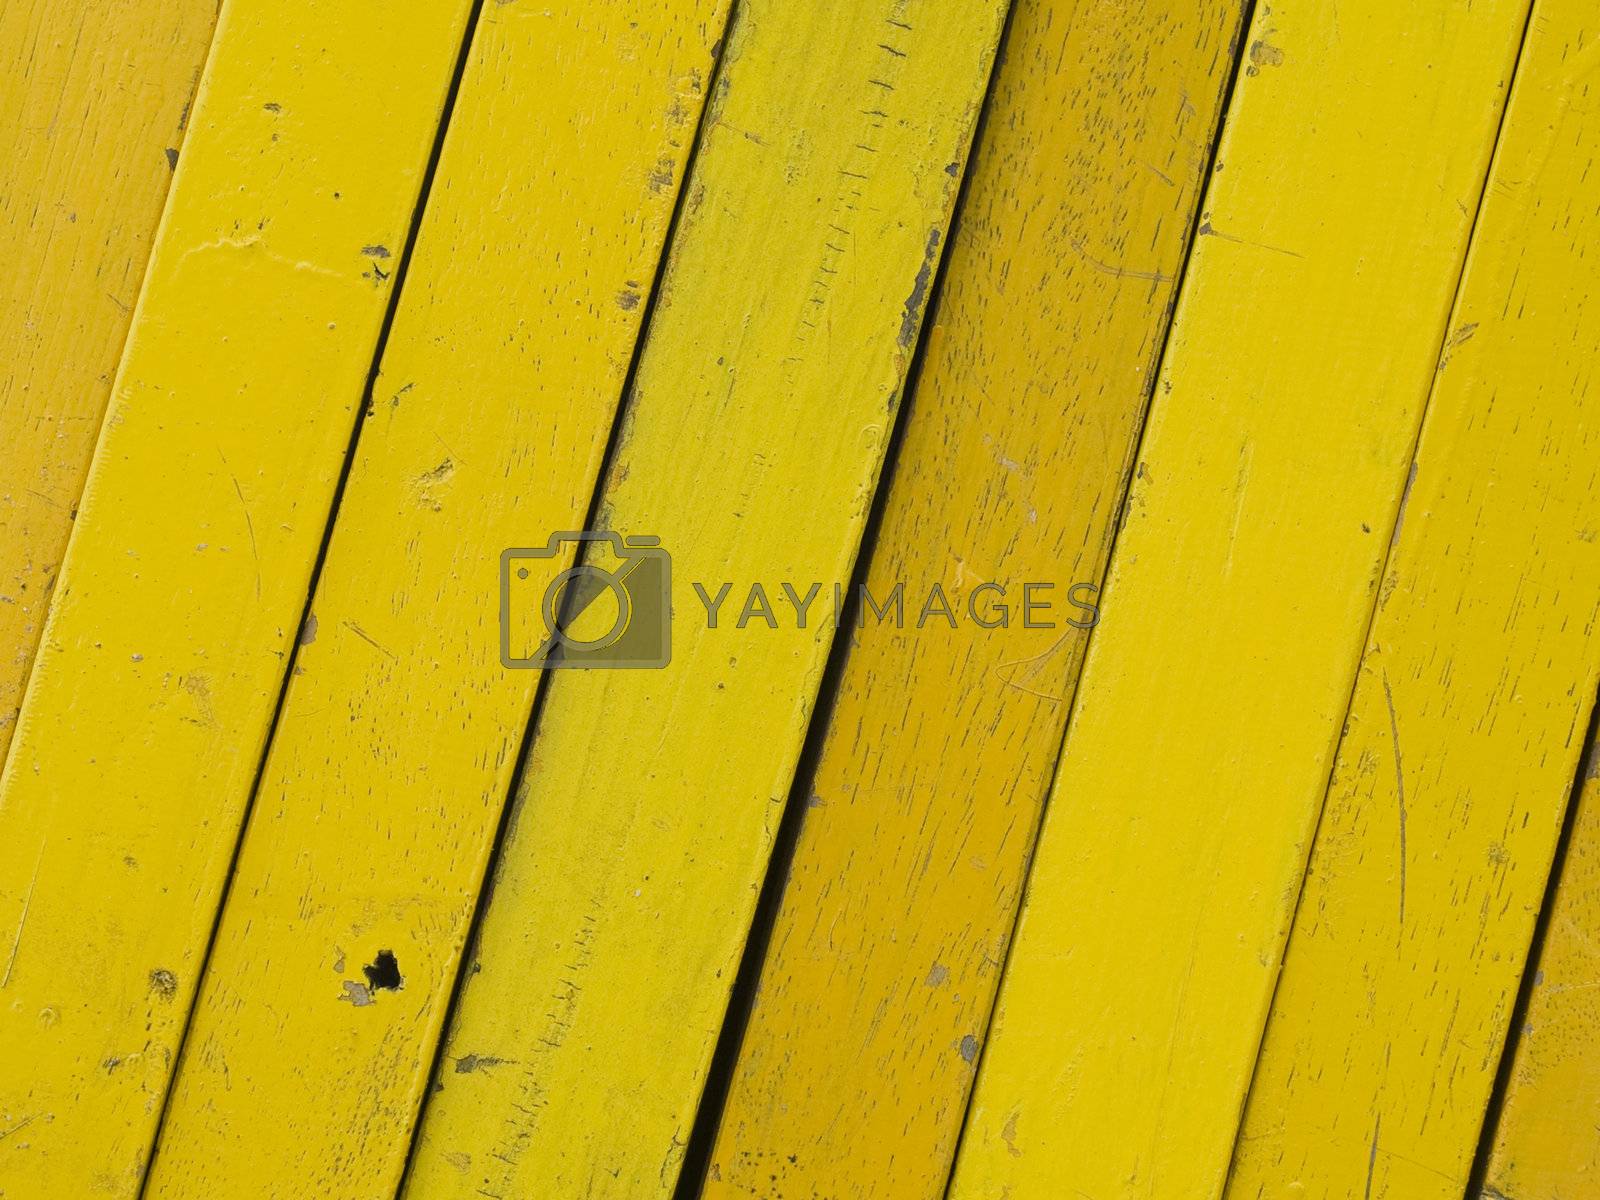 Royalty free image of Diagonal, yellow planks by epixx